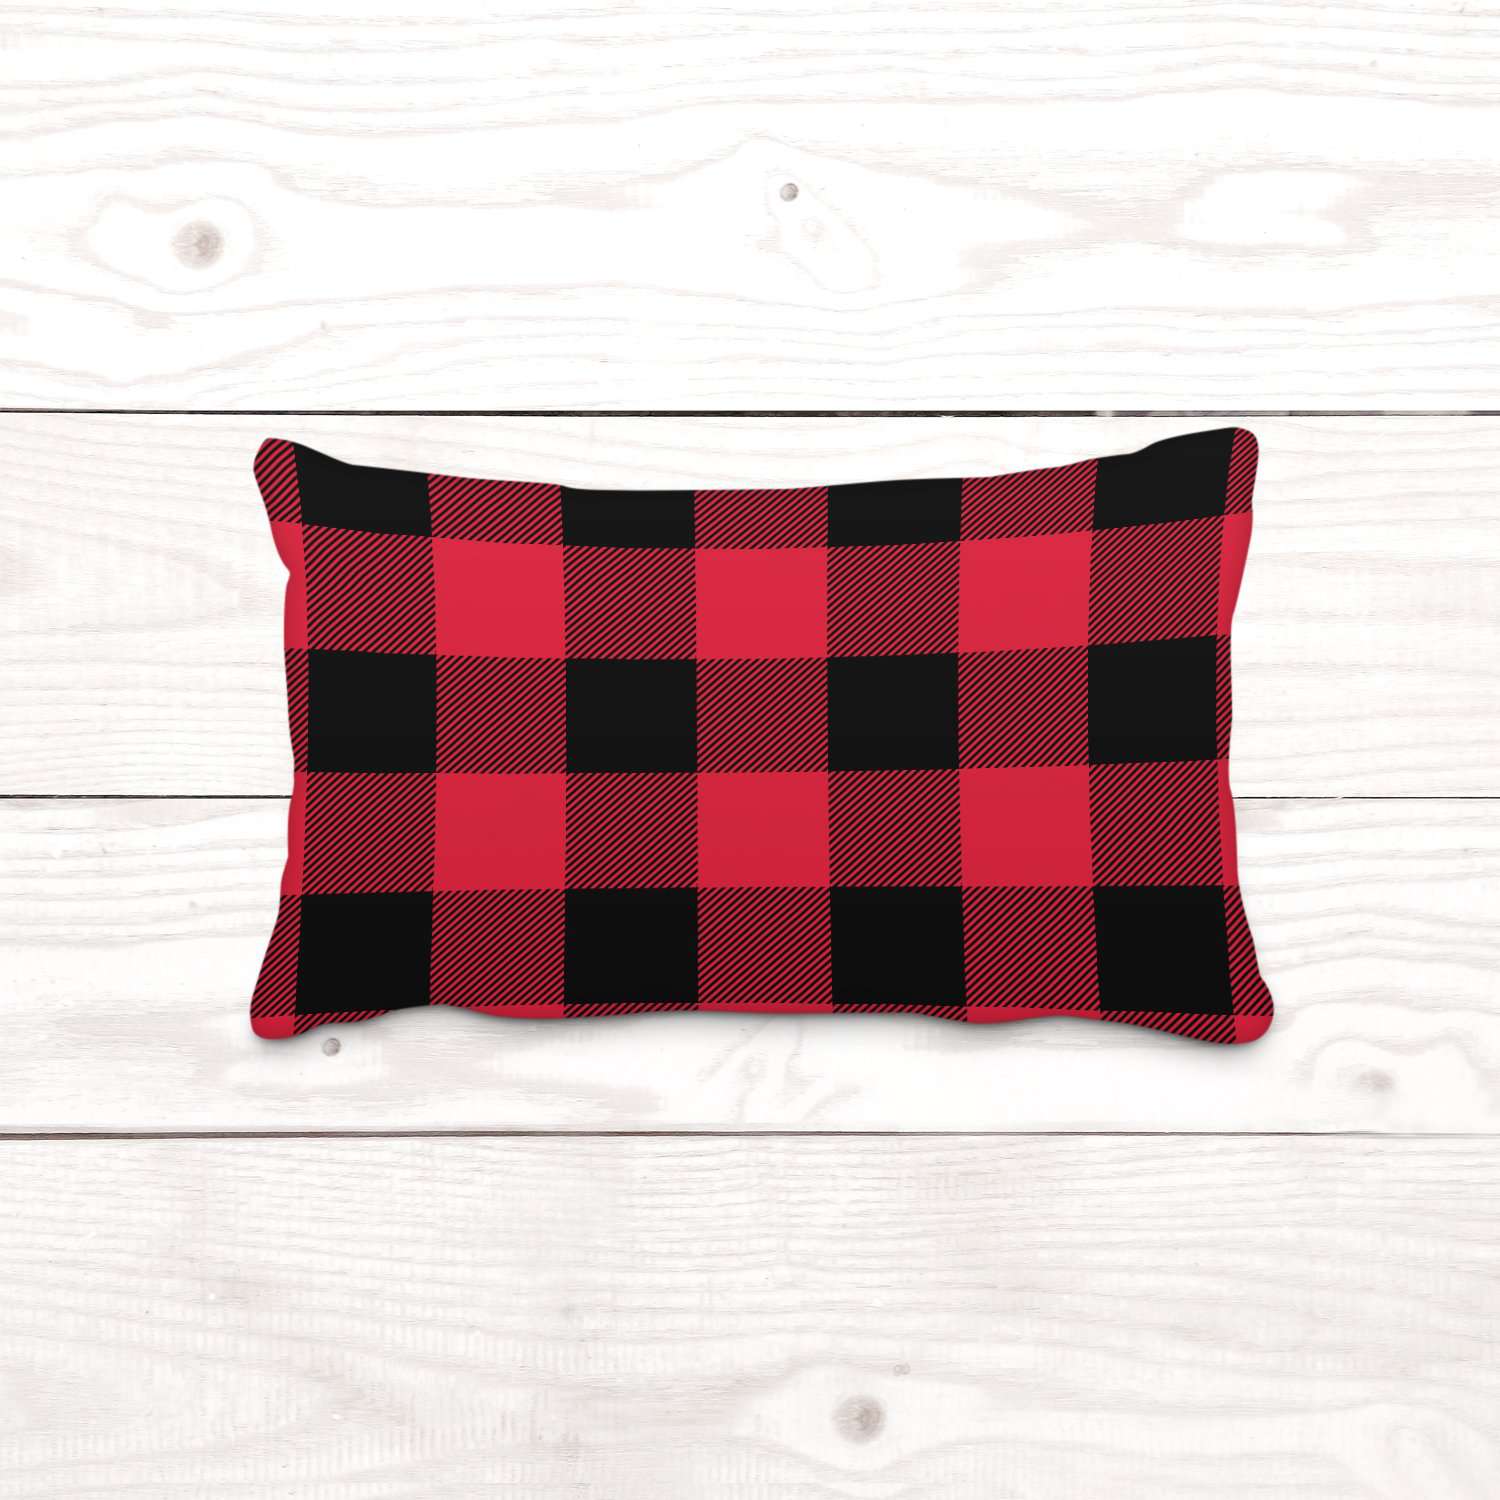 Red and black buffalo lumbar pillow. The pillow cover is detachable as well.